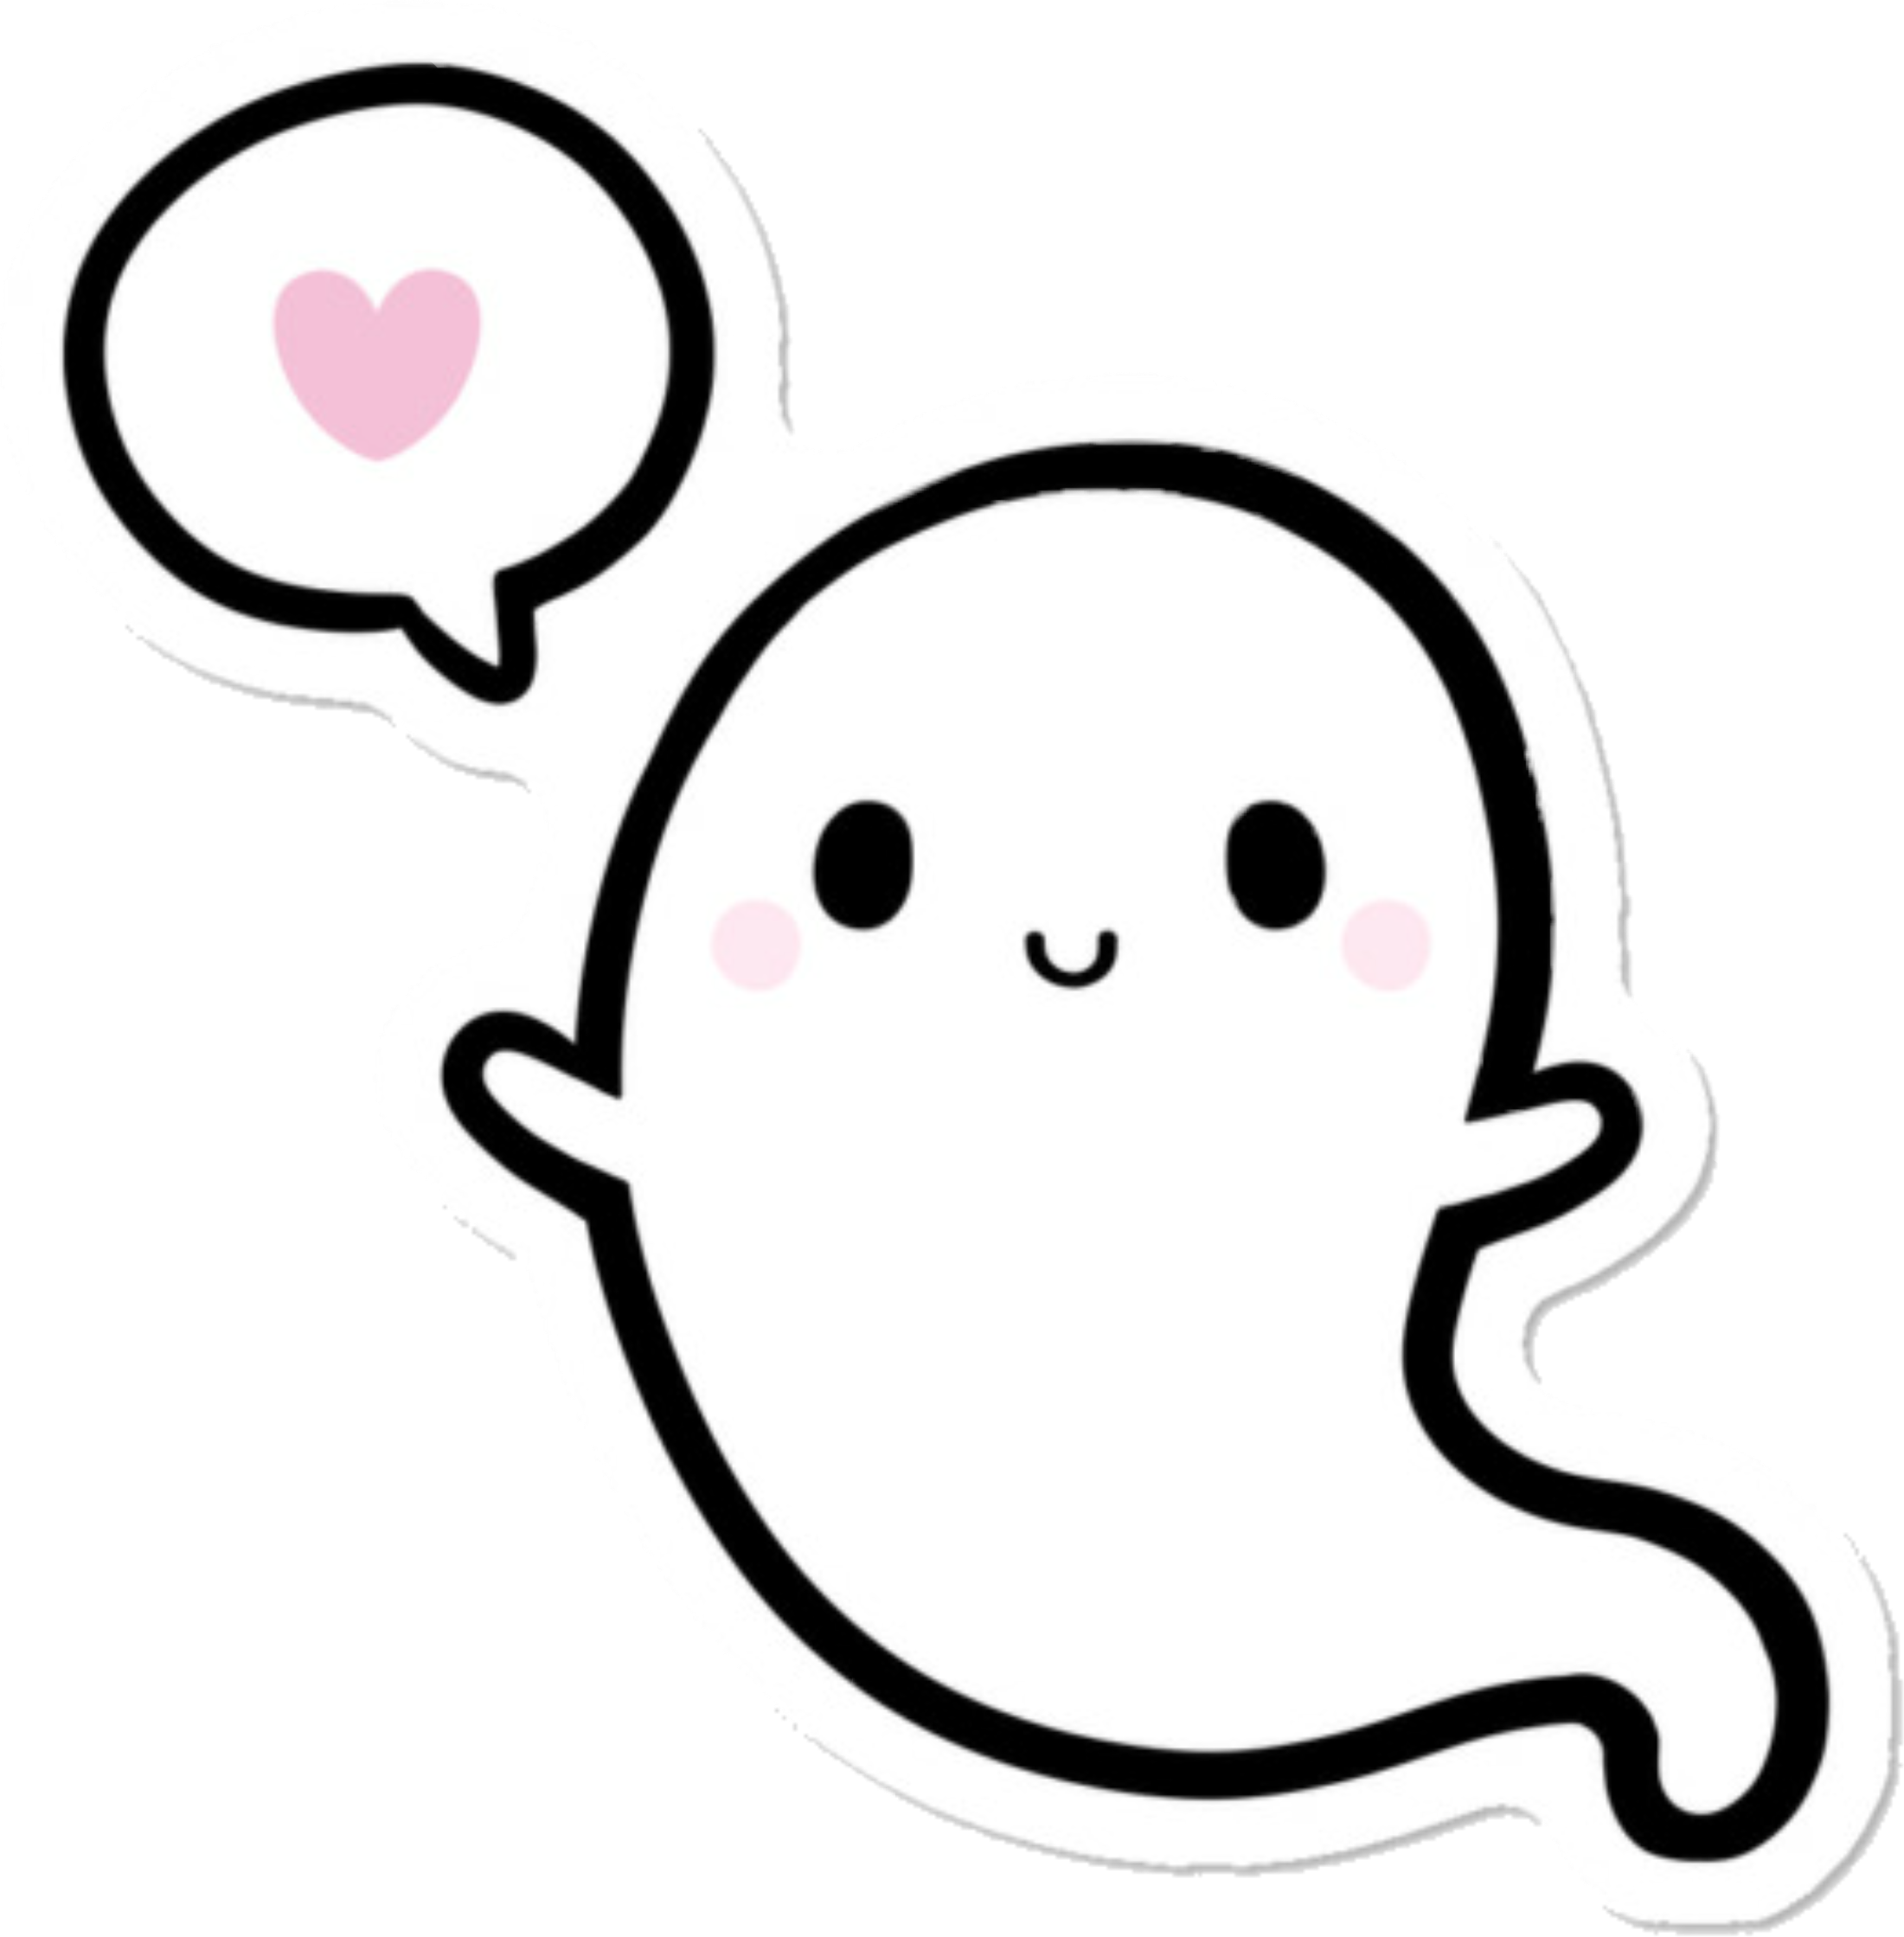 Cute Ghost With Heart Bubble Sticker PNG image